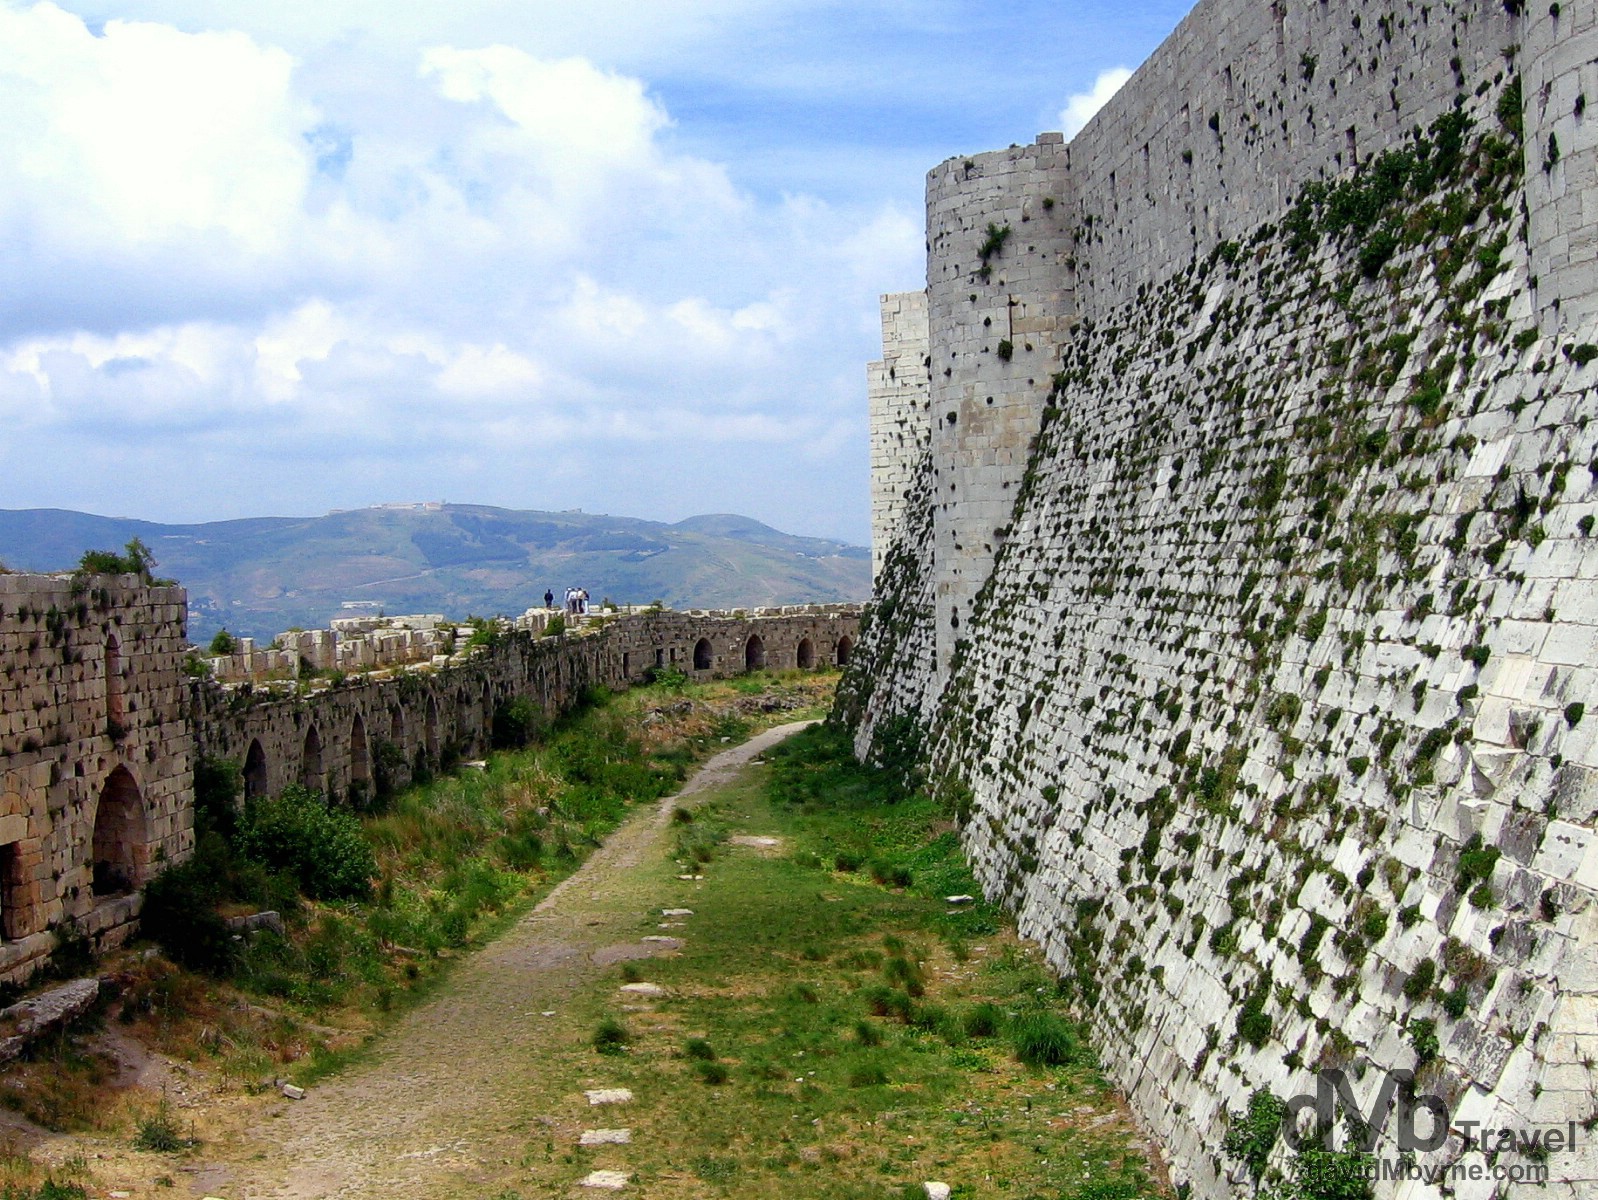 A section of the external wall of the Crusader castle Crac des Chevaliers in Syria. May 7, 2008.